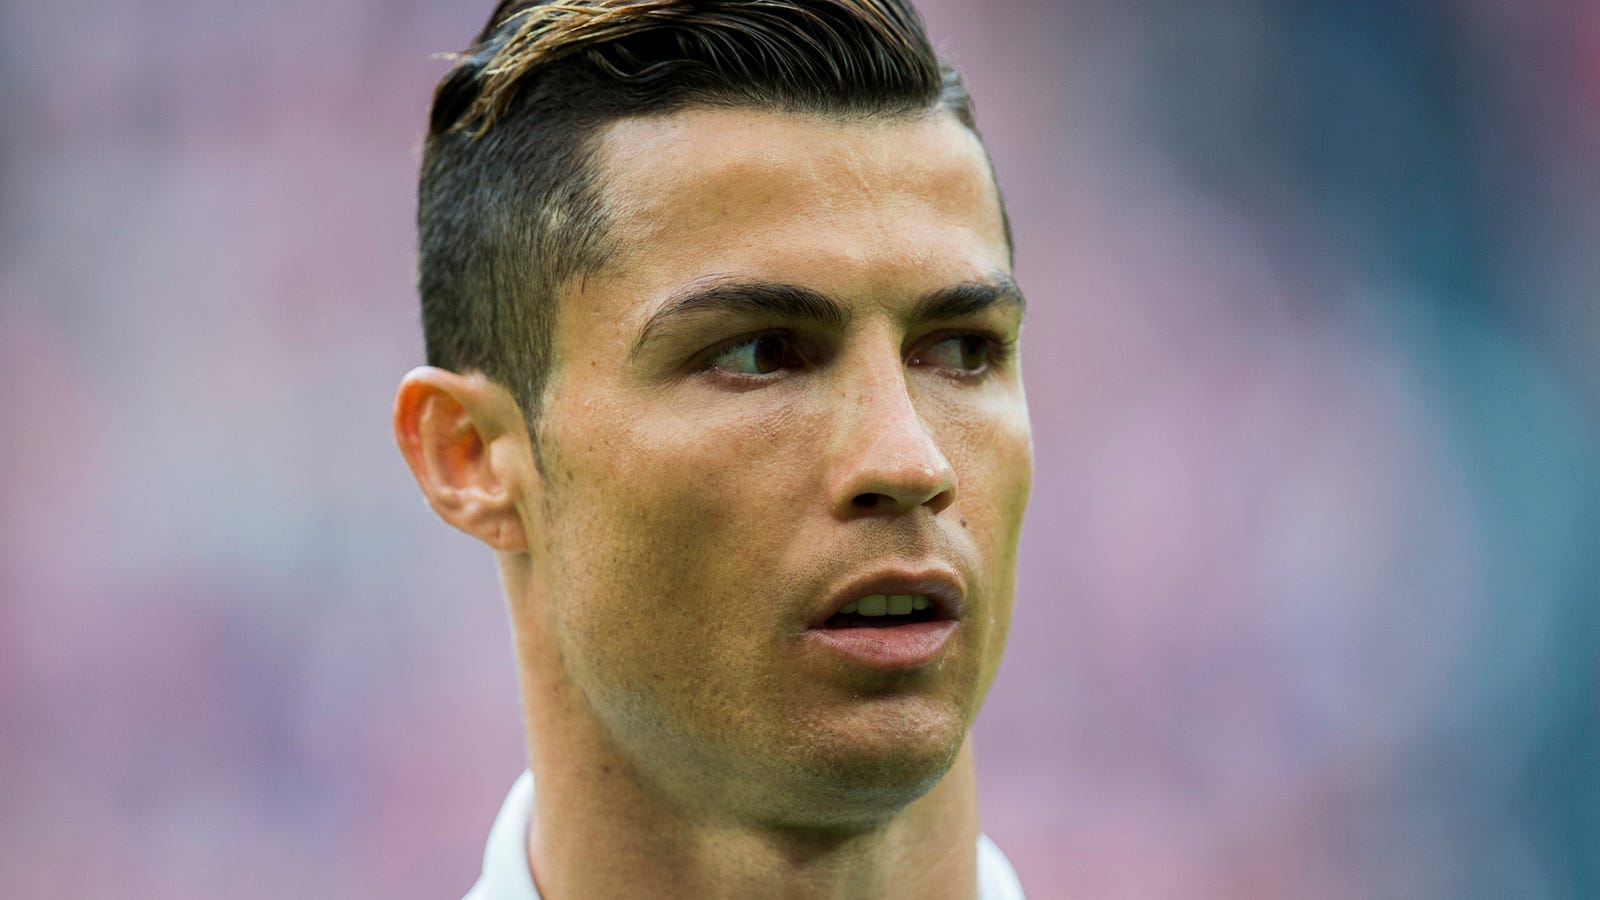 Report: Cristiano Ronaldo Paid $375K To Woman Who Claimed 